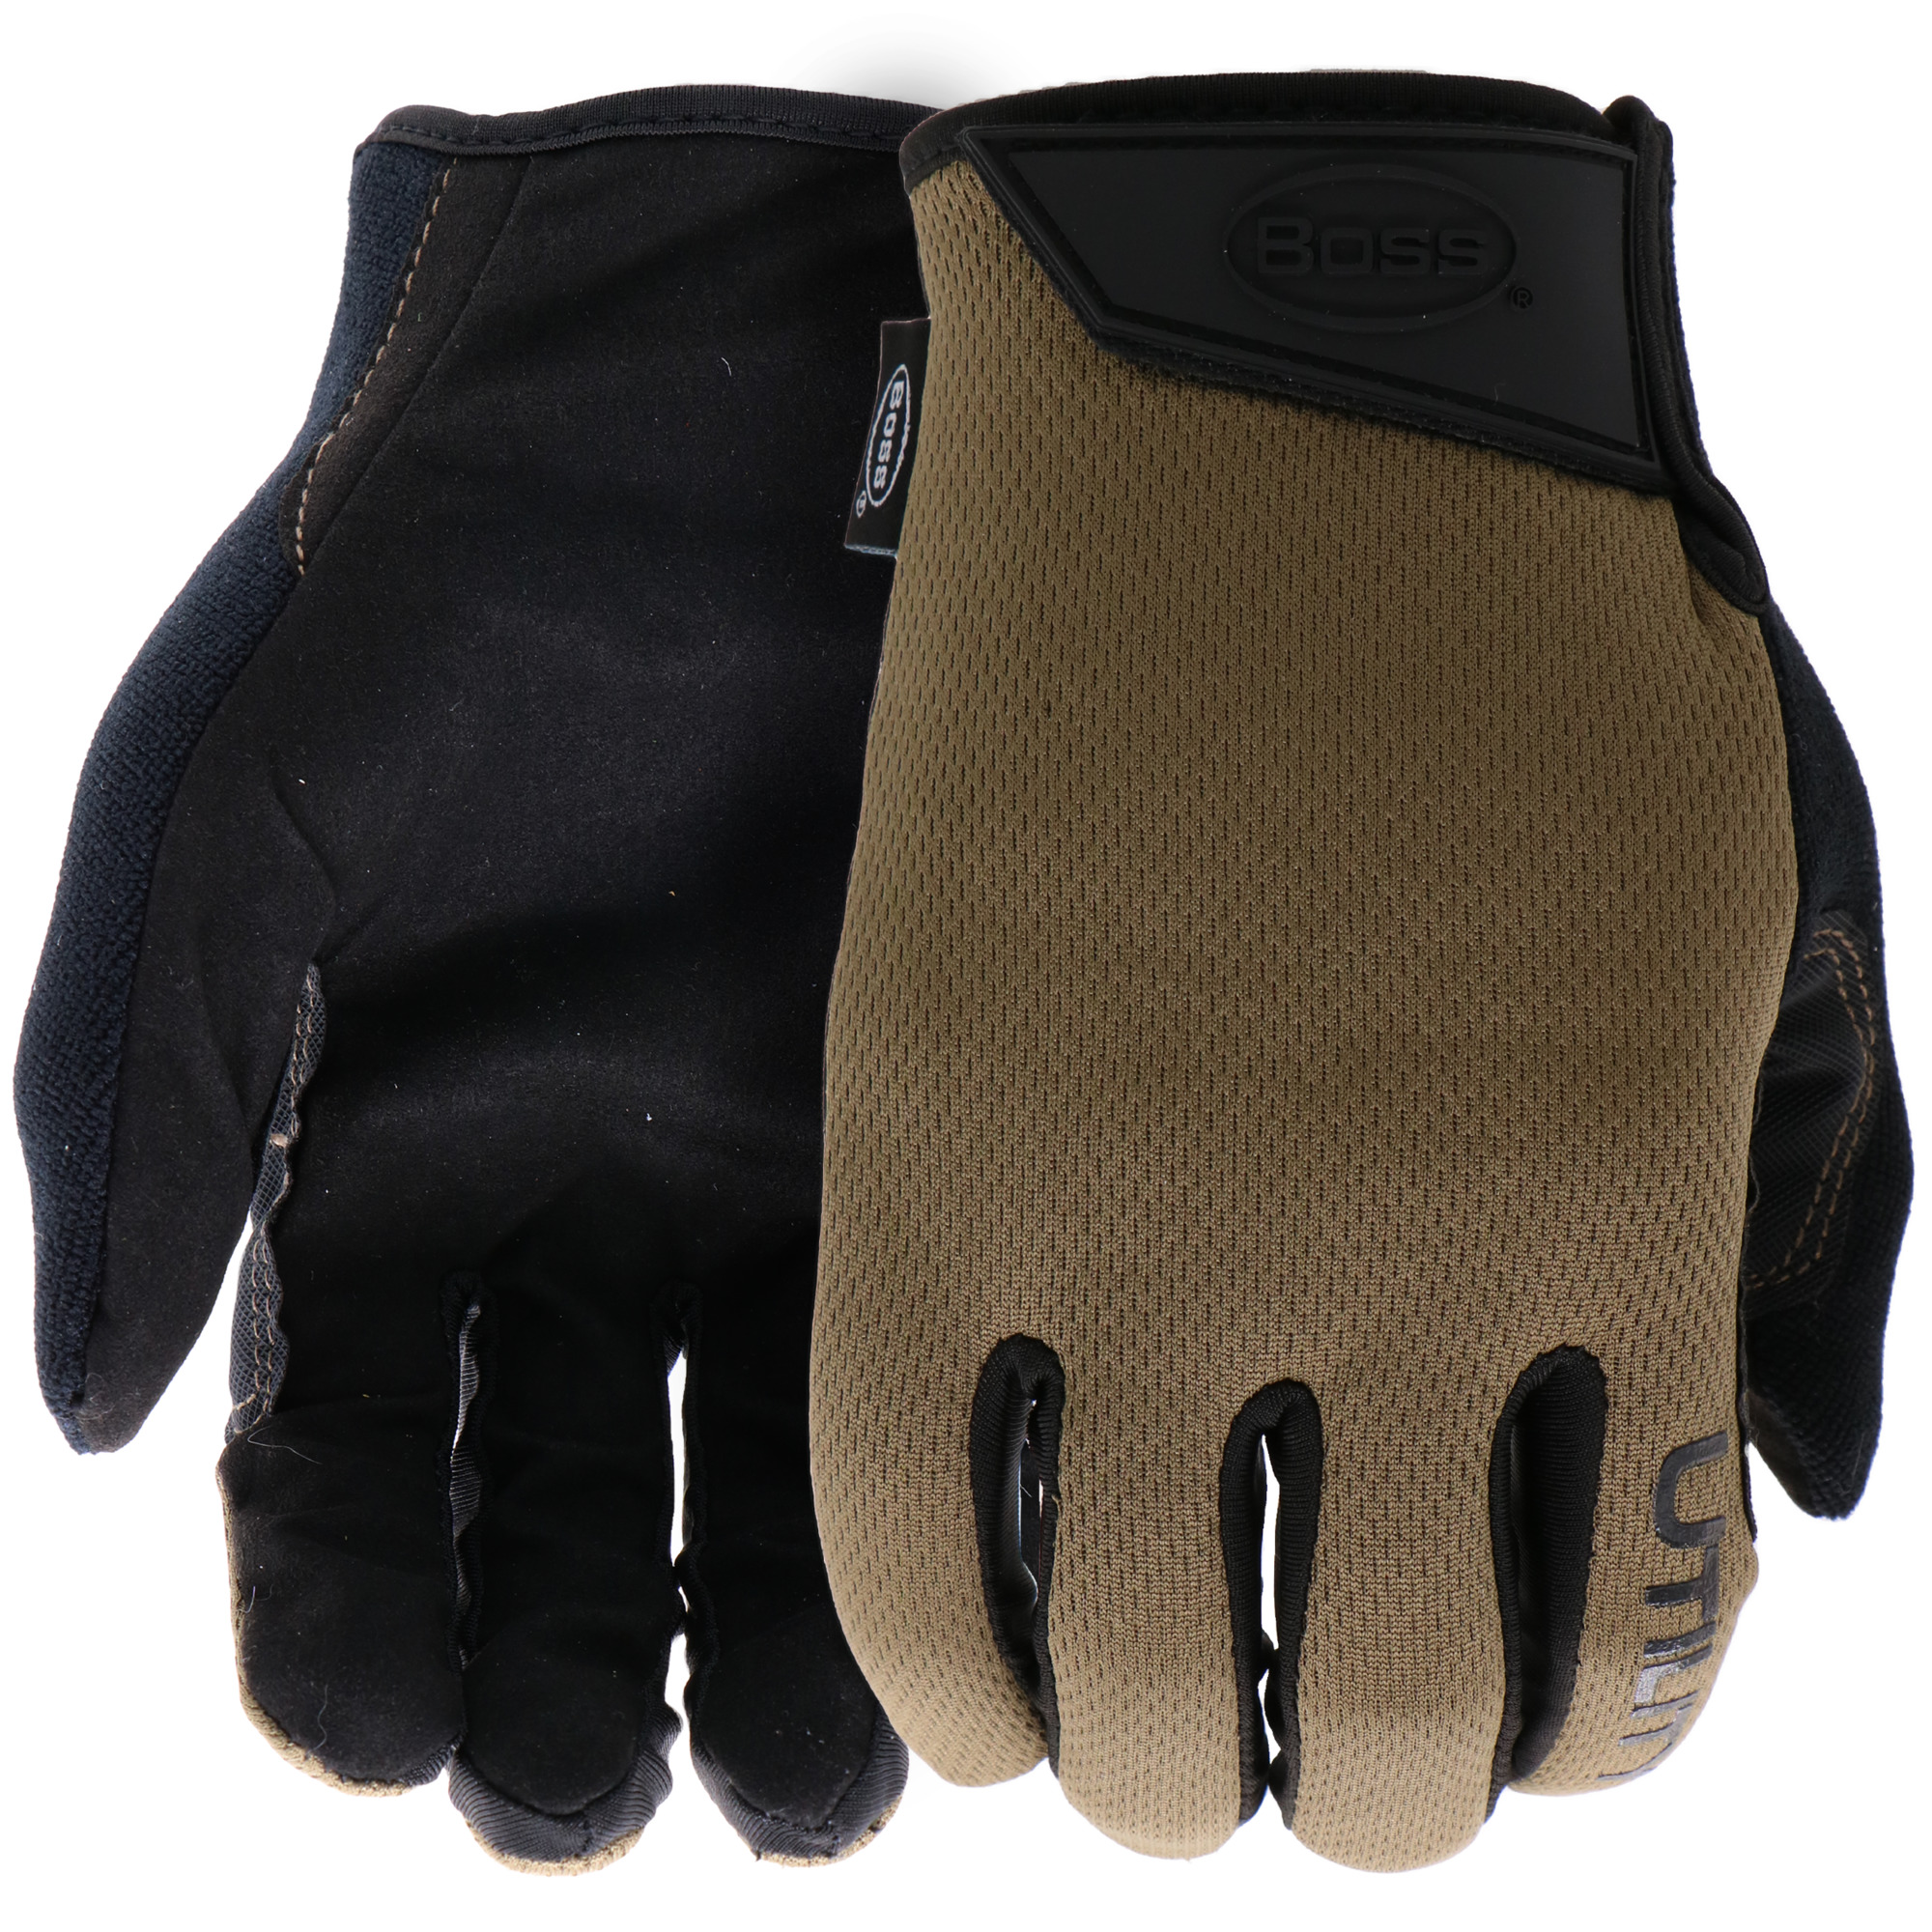 Boss, Hi-Performance Utility Glove with spandex back, Size L, Color Black, Included (qty.) 1, Model B52001-L